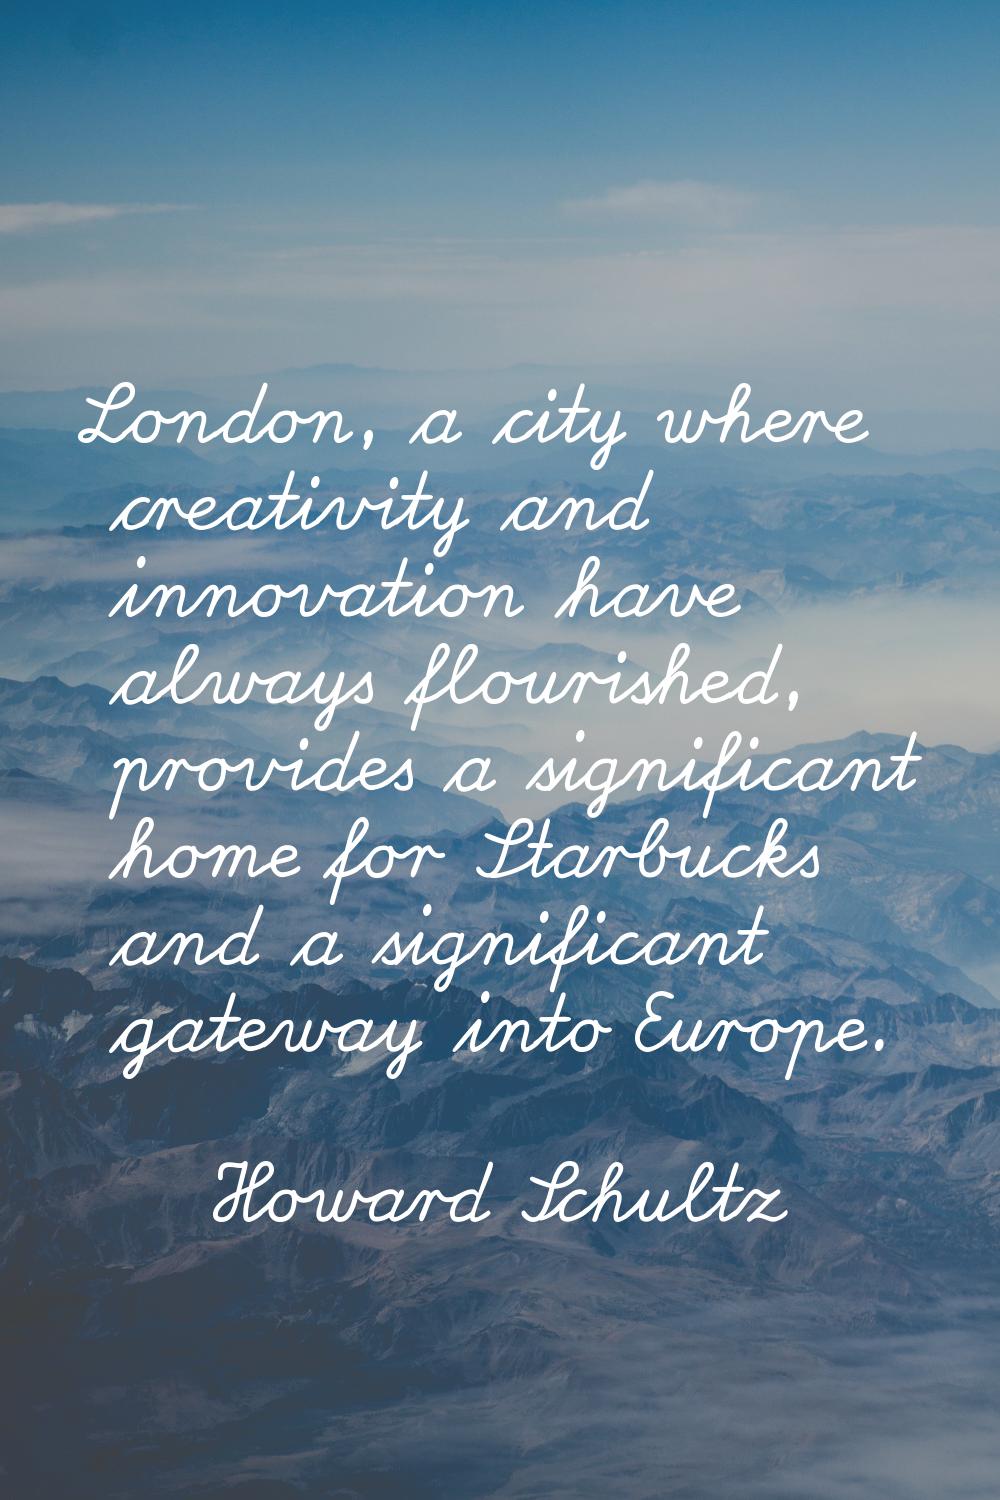 London, a city where creativity and innovation have always flourished, provides a significant home 